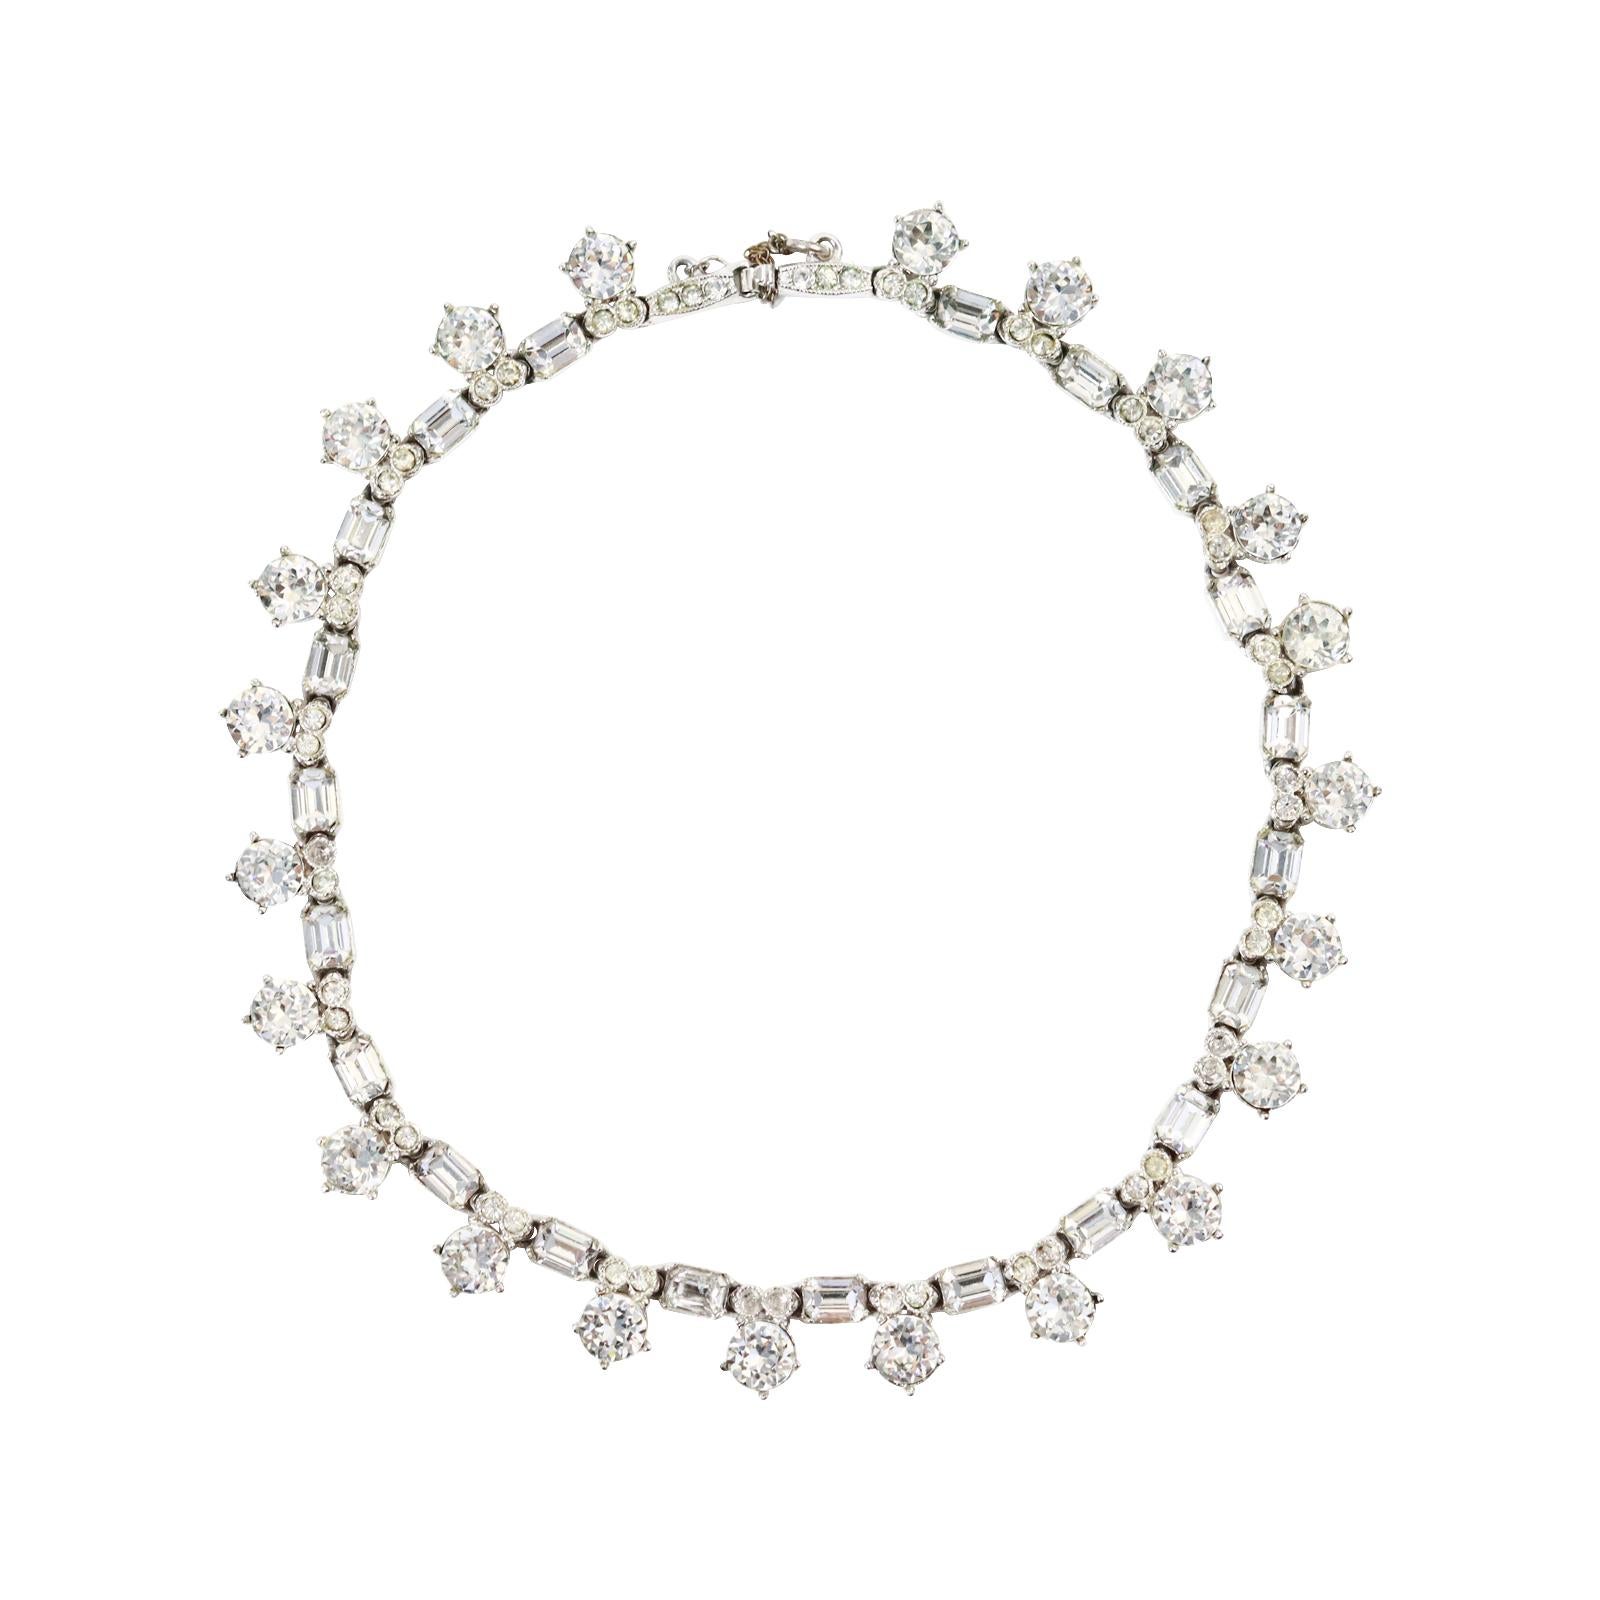 Vintage Bogoff Diamante Rounds and Baguettes Choker Necklace Circa 1960s. This is very elegant. This is so chic and yes chokers are back. This is heavy and substantial and well made.   This is made of drop round stones with a baguette in between